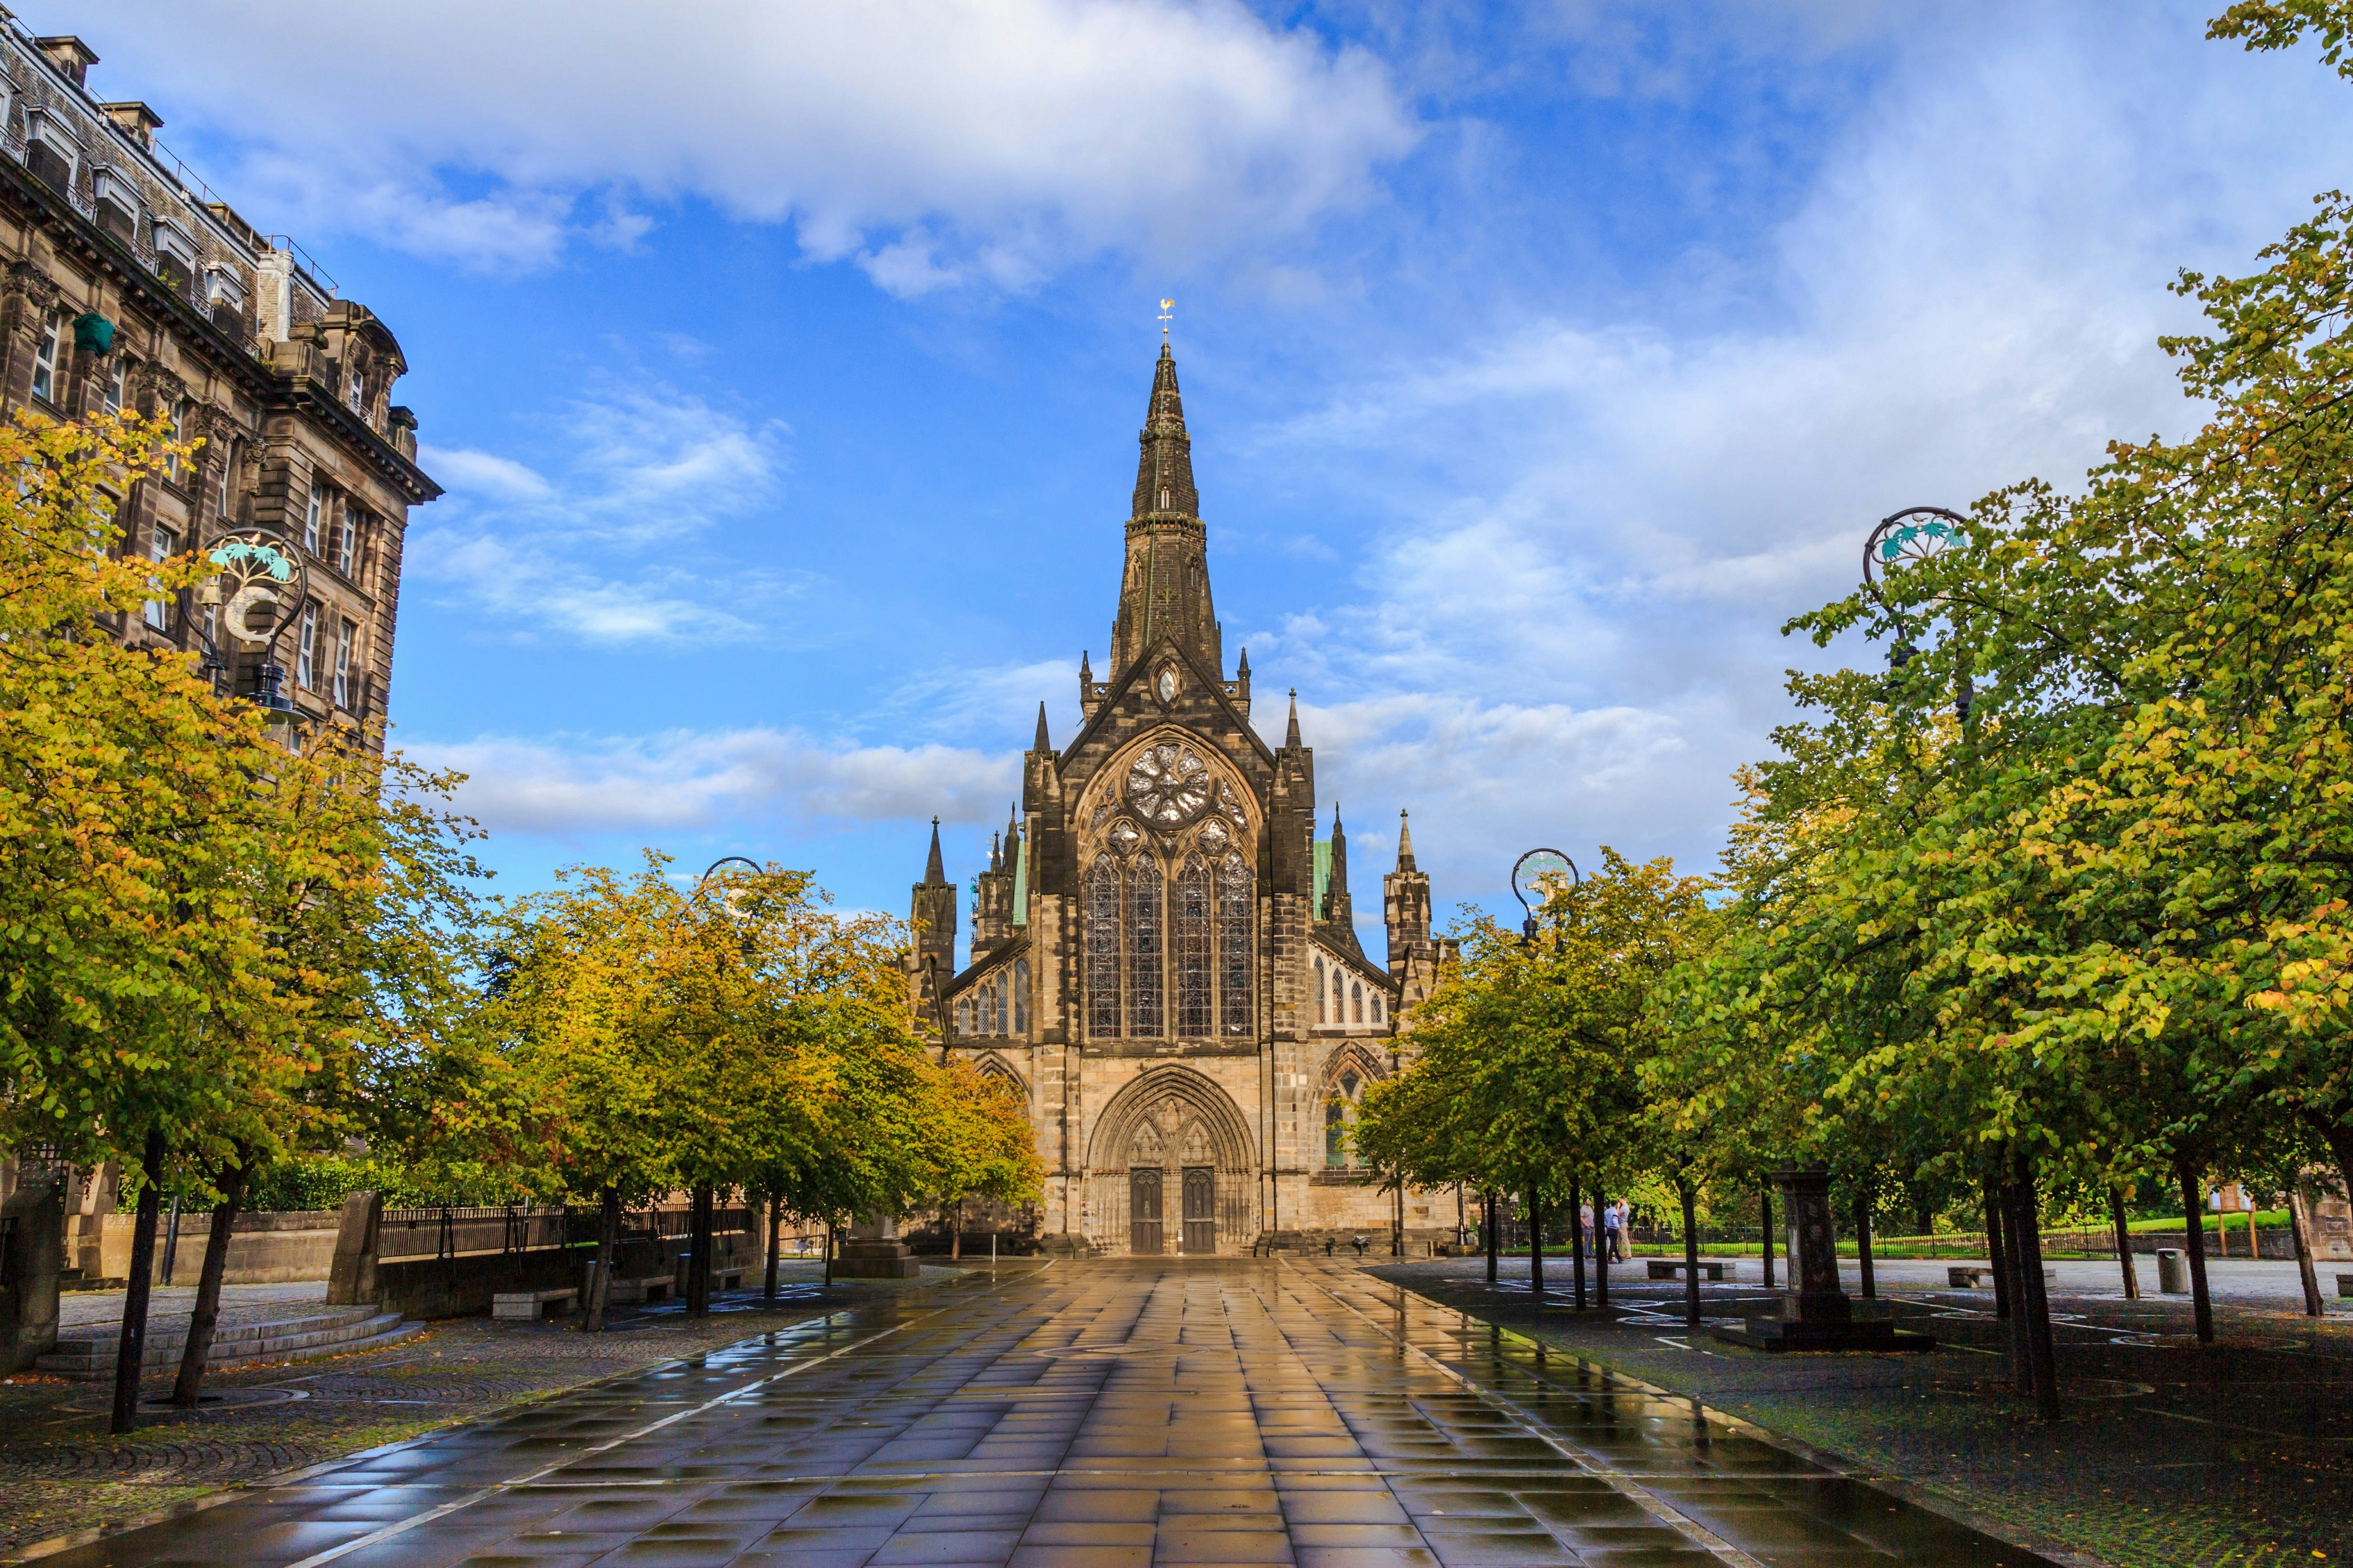 The facade of Glasgow Cathedral, a stone Gothic structure, after rain.